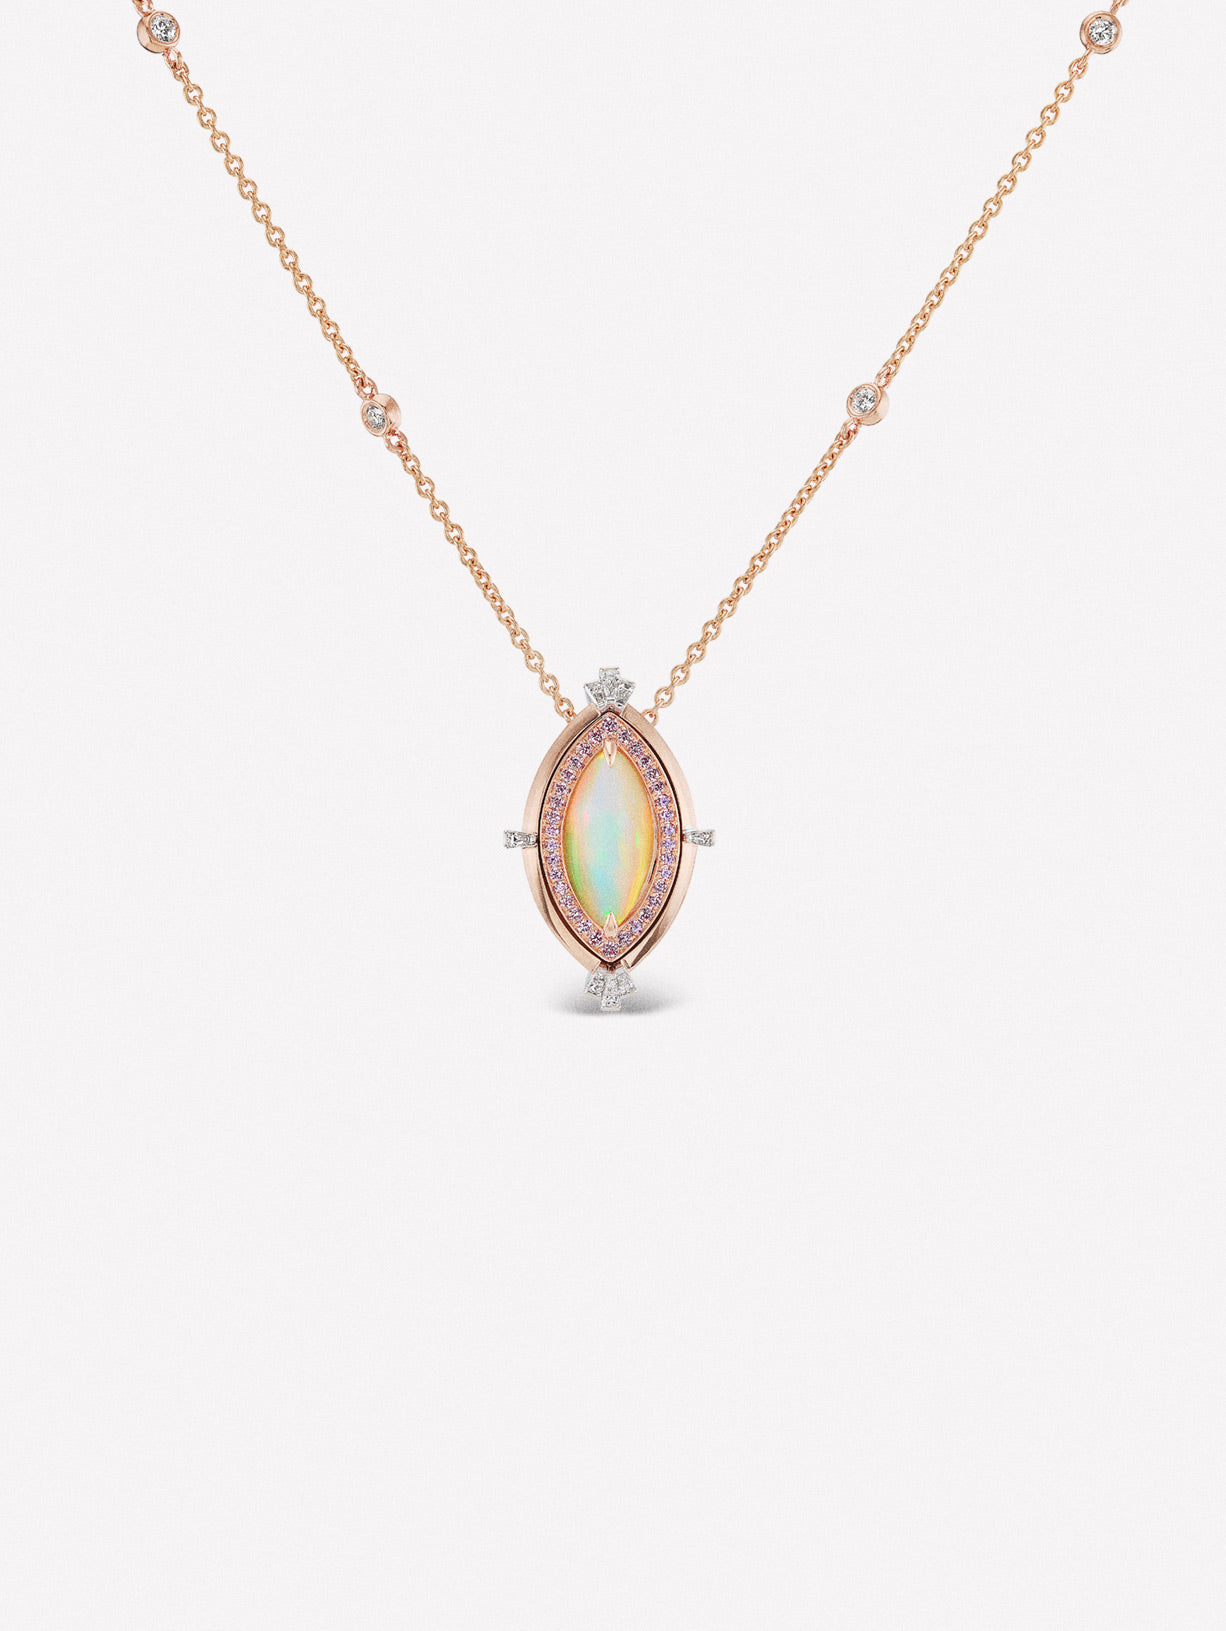 Marquise Shape Opal with Argyle Pink Diamonds in Deco inspired Necklace from JFINE